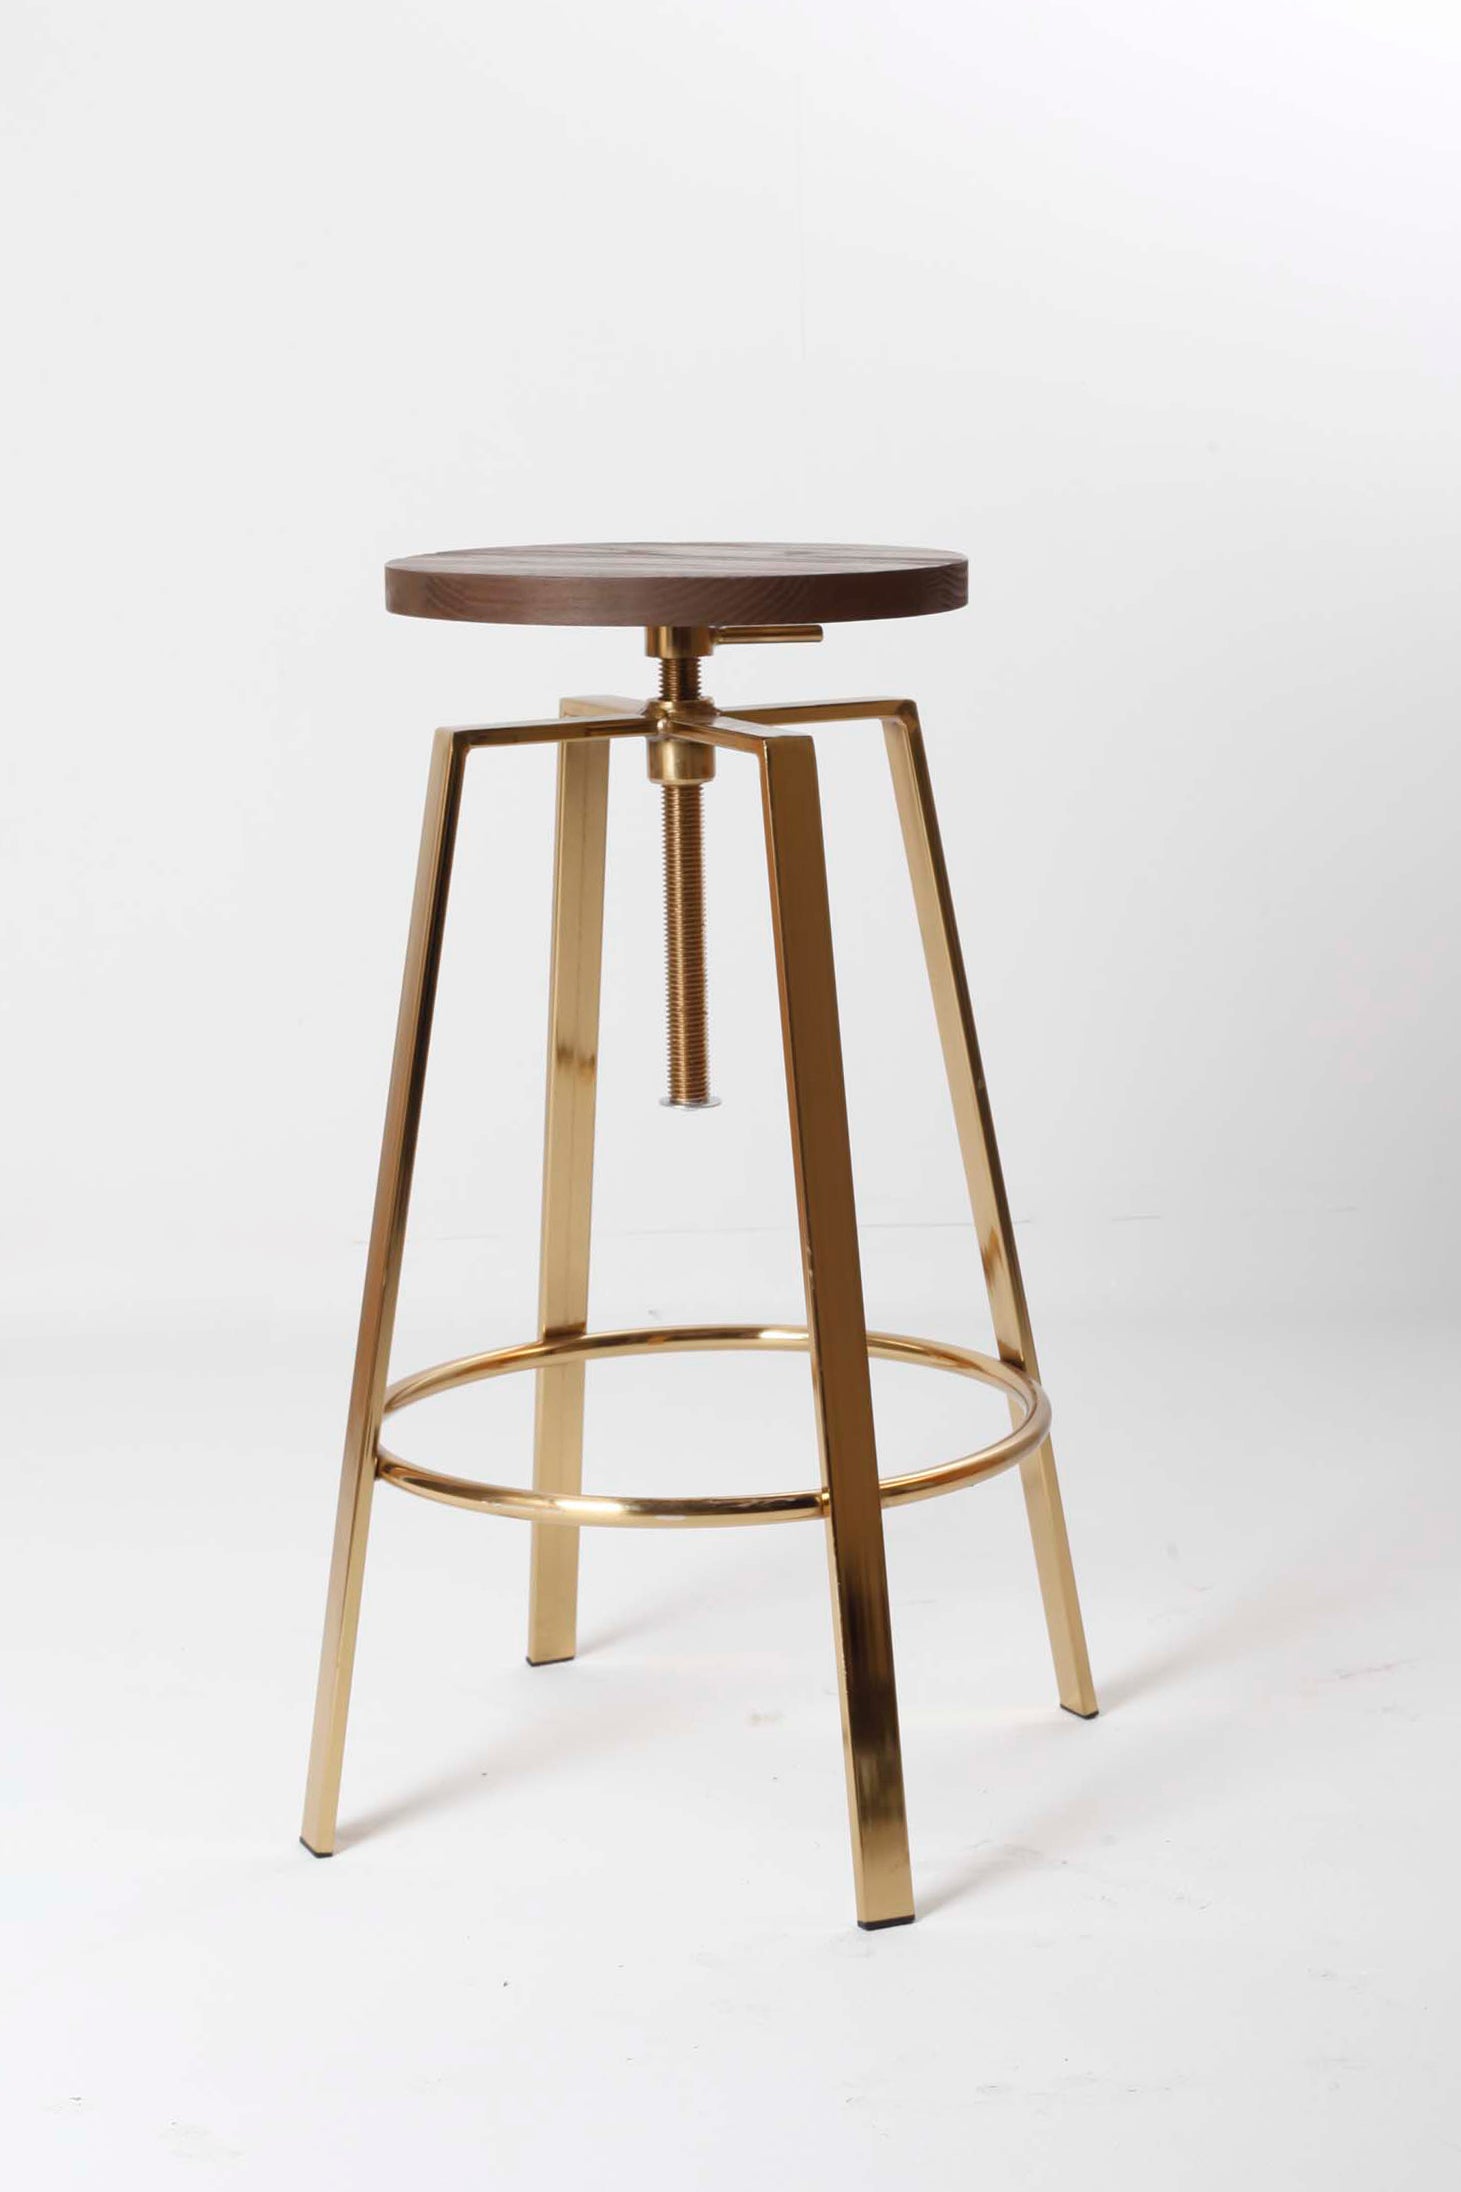 WOODEN BAR STOOL WITH BRASS LEGS - ADJUSTABLE HEIGHT